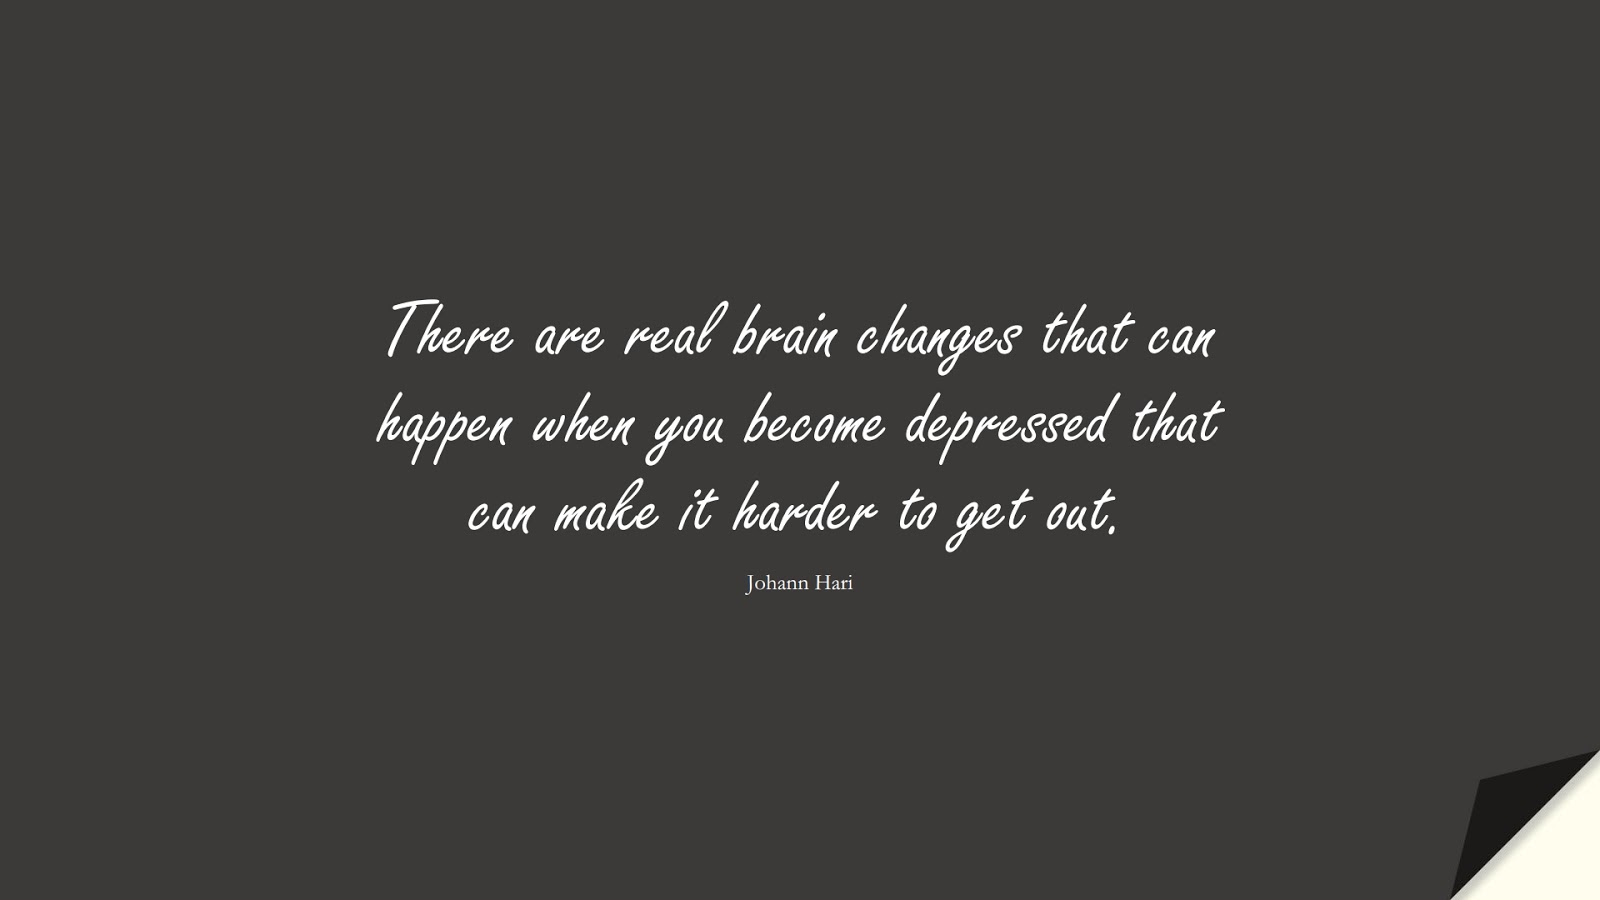 There are real brain changes that can happen when you become depressed that can make it harder to get out. (Johann Hari);  #DepressionQuotes